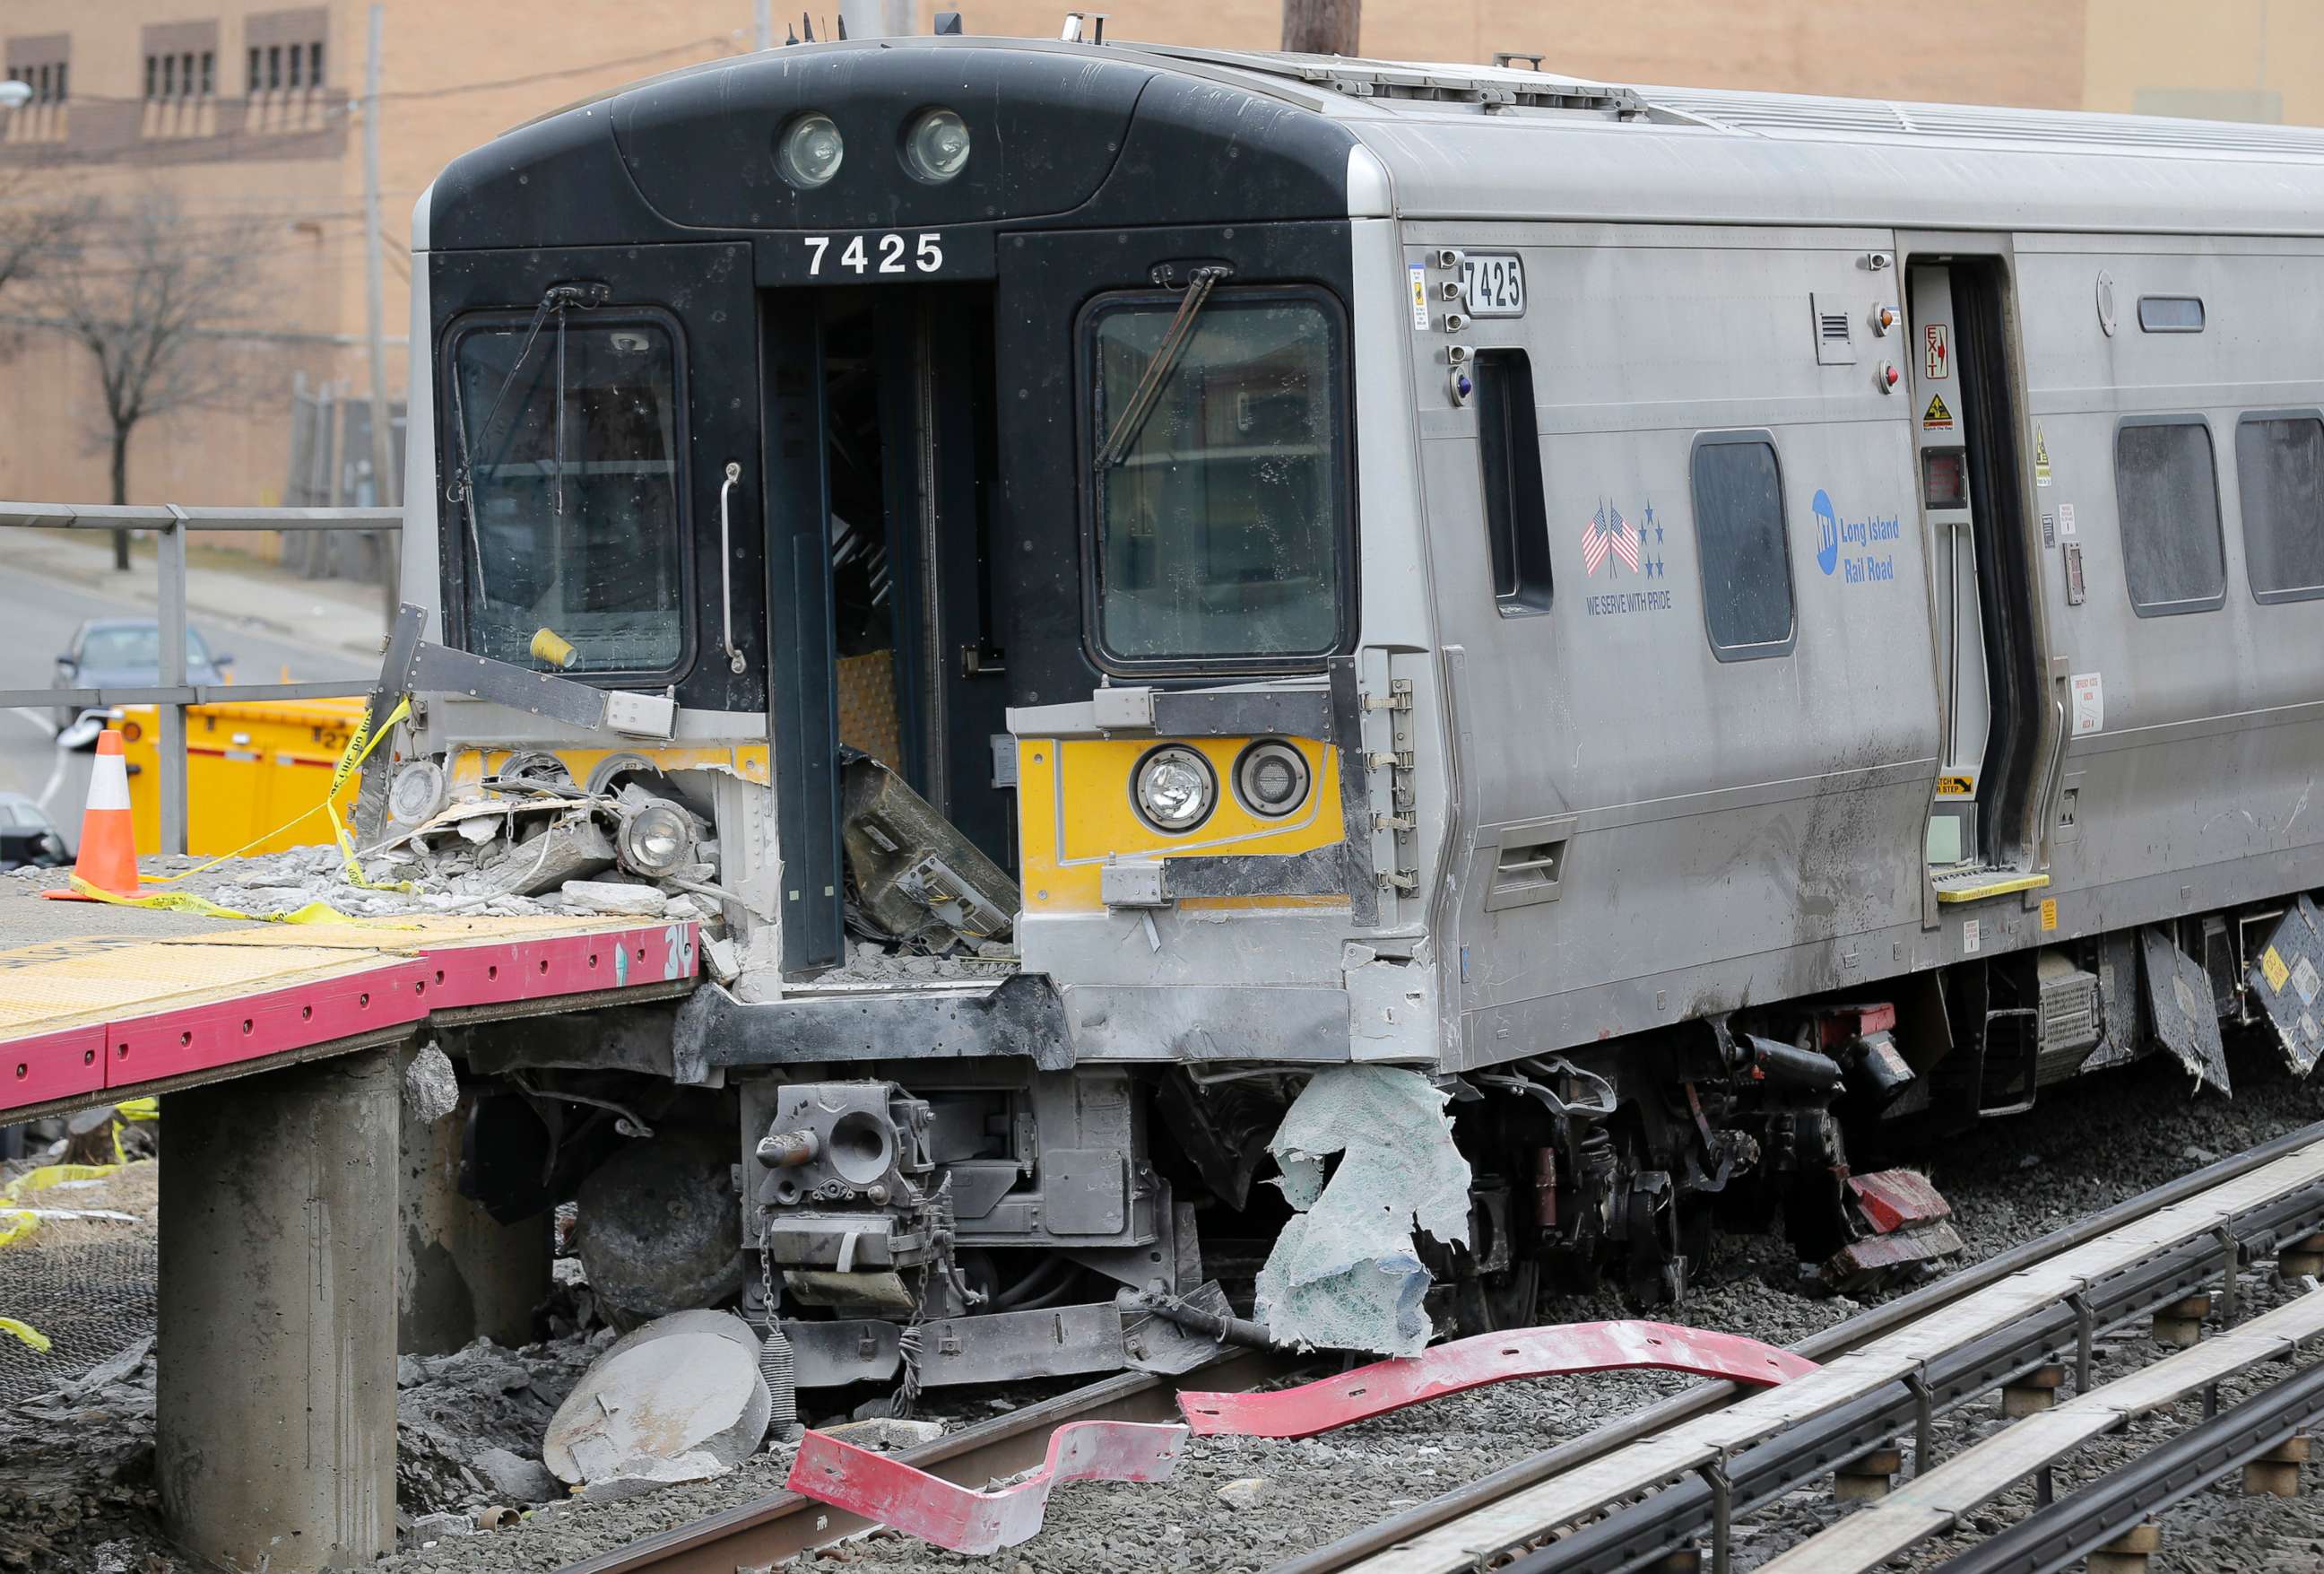 PHOTO: A train that derailed after striking a vehicle is seen in Westbury, N.Y., Feb. 27, 2019. Two commuter trains traveling in opposite directions collided with a vehicle on the tracks in Westbury, killing all three occupants.